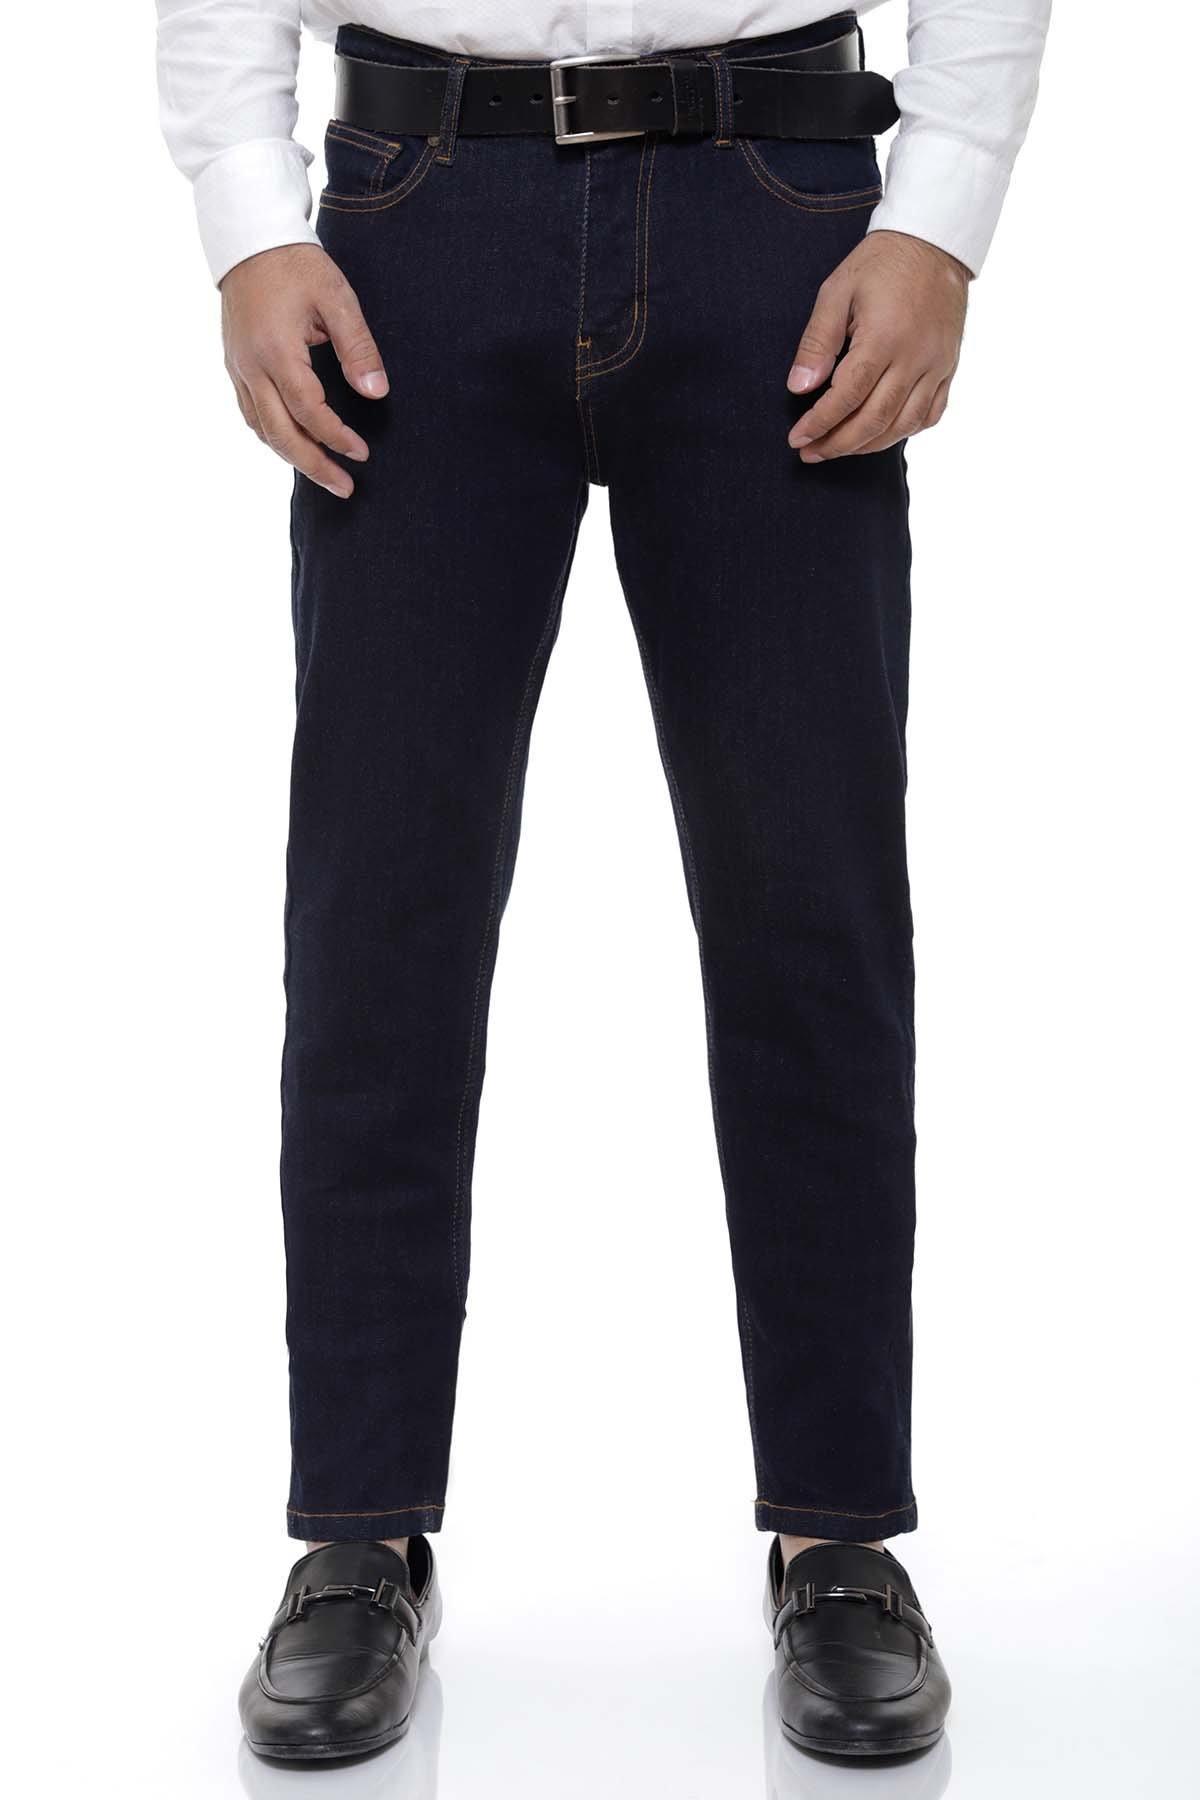 JEAN SLIM FIT NAVY at Charcoal Clothing